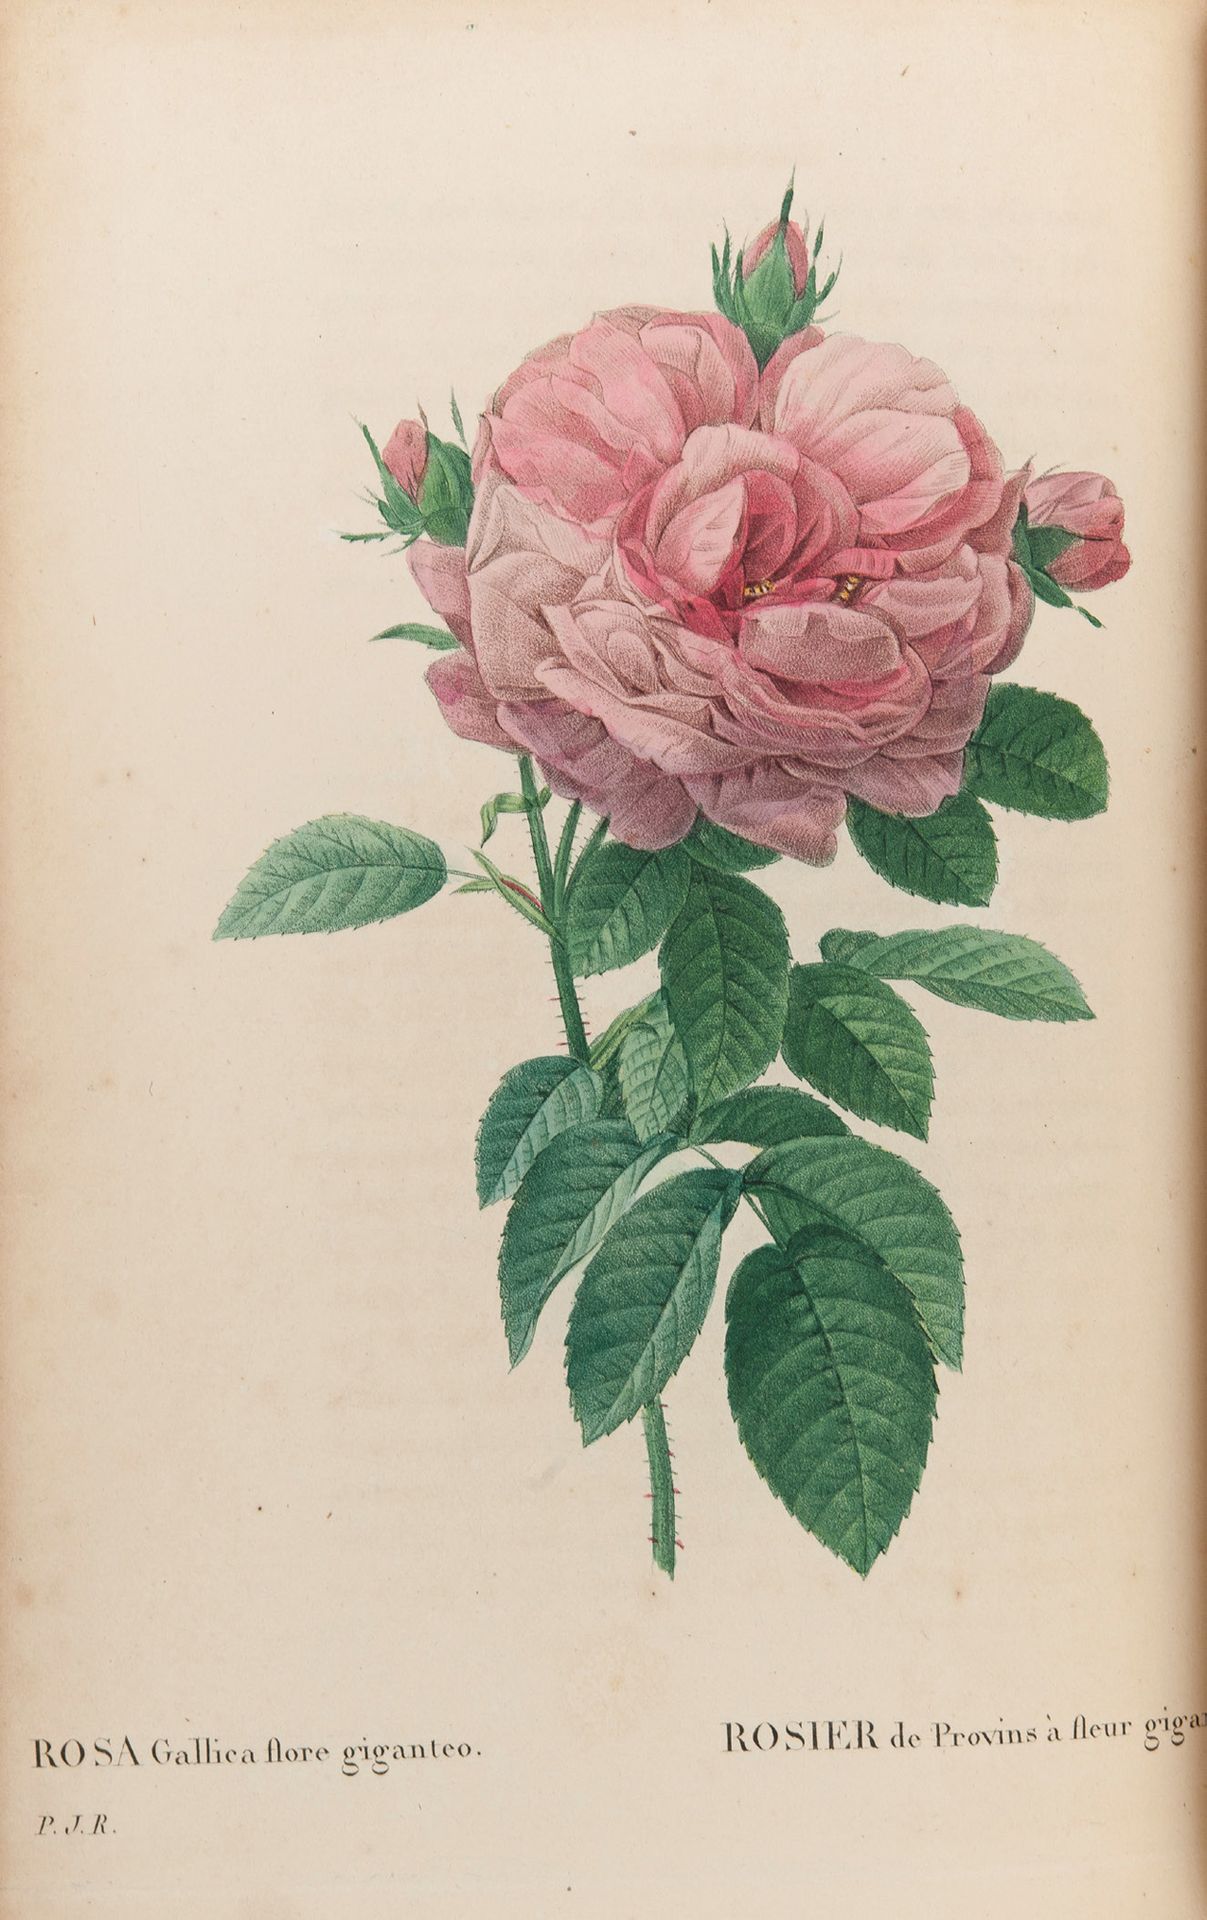 Pierre-Joseph REDOUTE (1759-1840) The roses painted by P.J. Redouté described by&hellip;